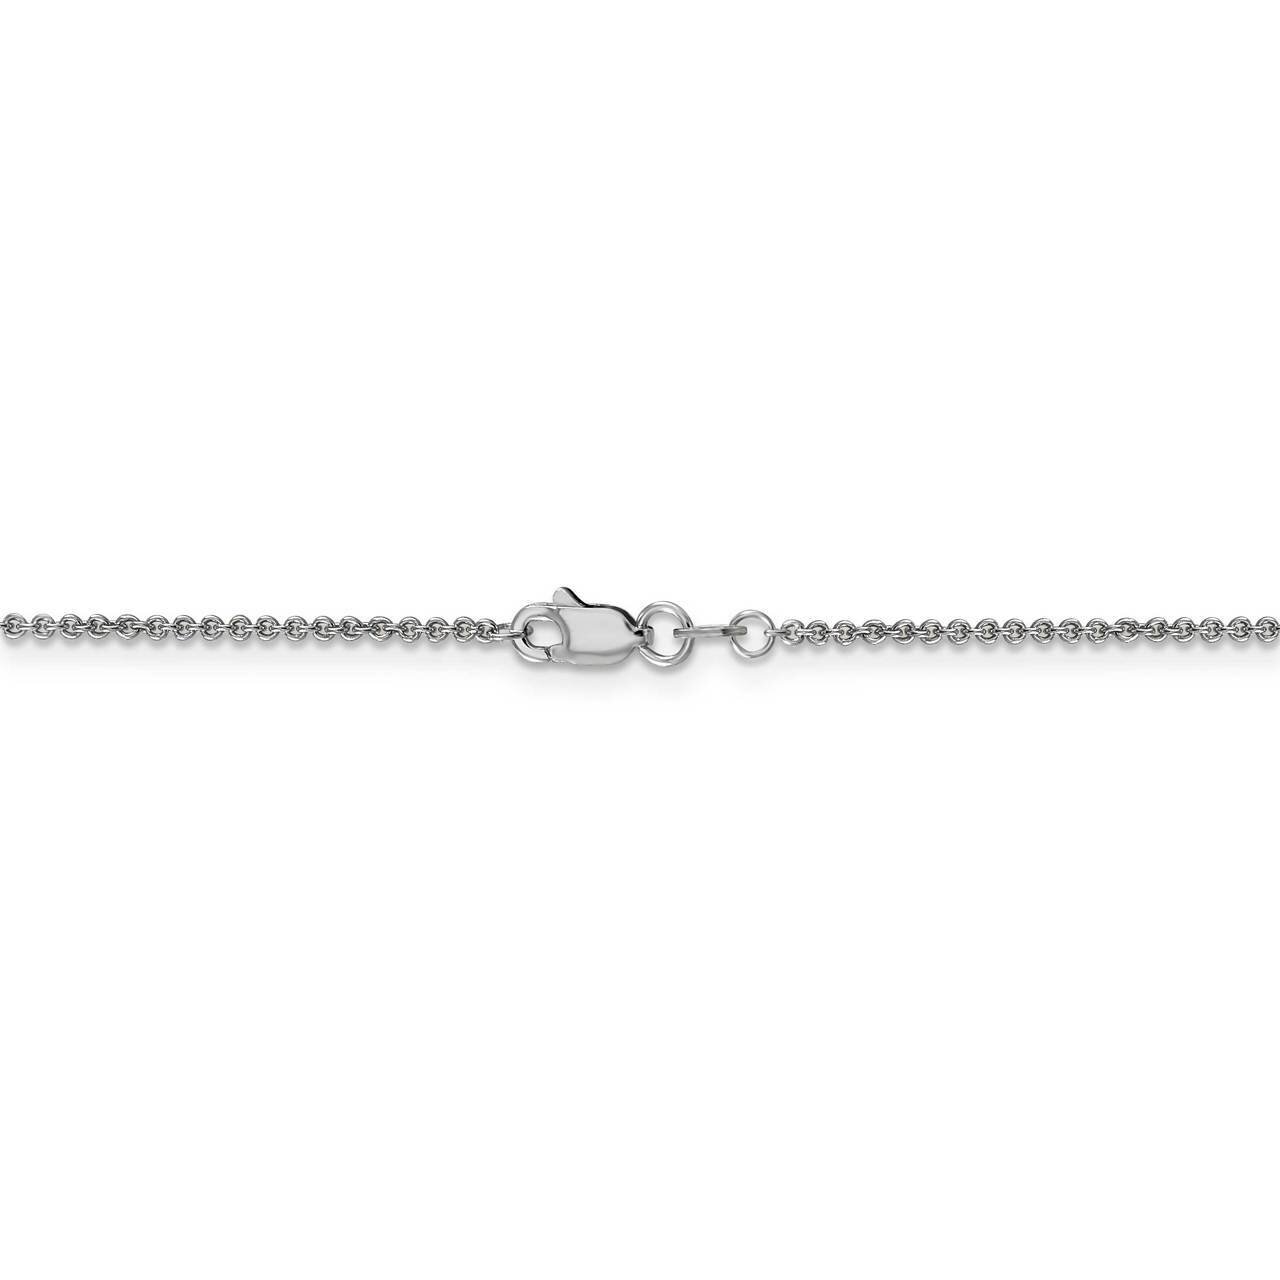 26 Inch 1.5mm Solid Polished Cable Chain 14k White Gold PEN137-26